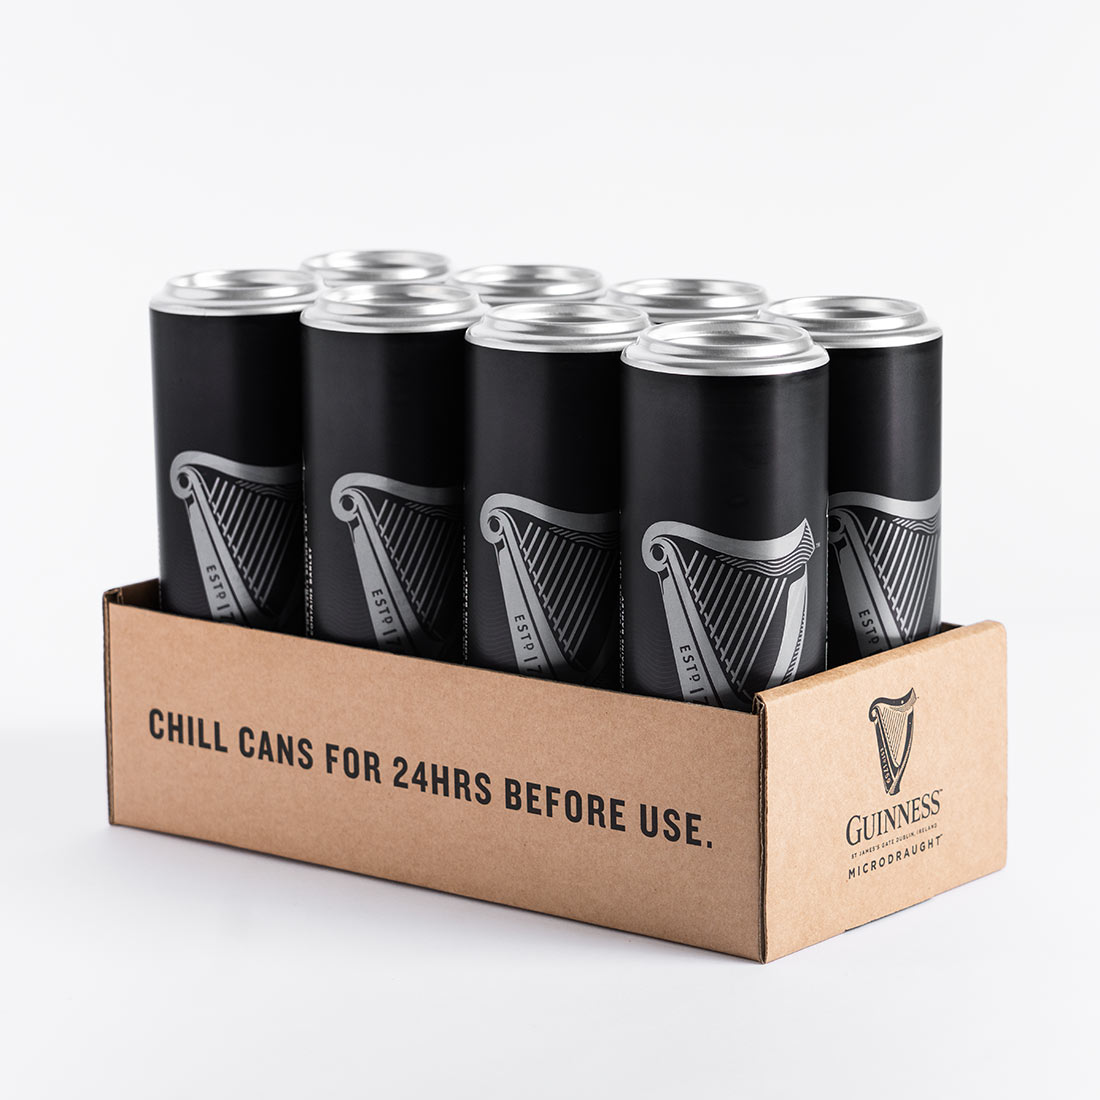 Six Guinness MicroDraught Stout Beer Cans from Guinness UK in a cardboard box.